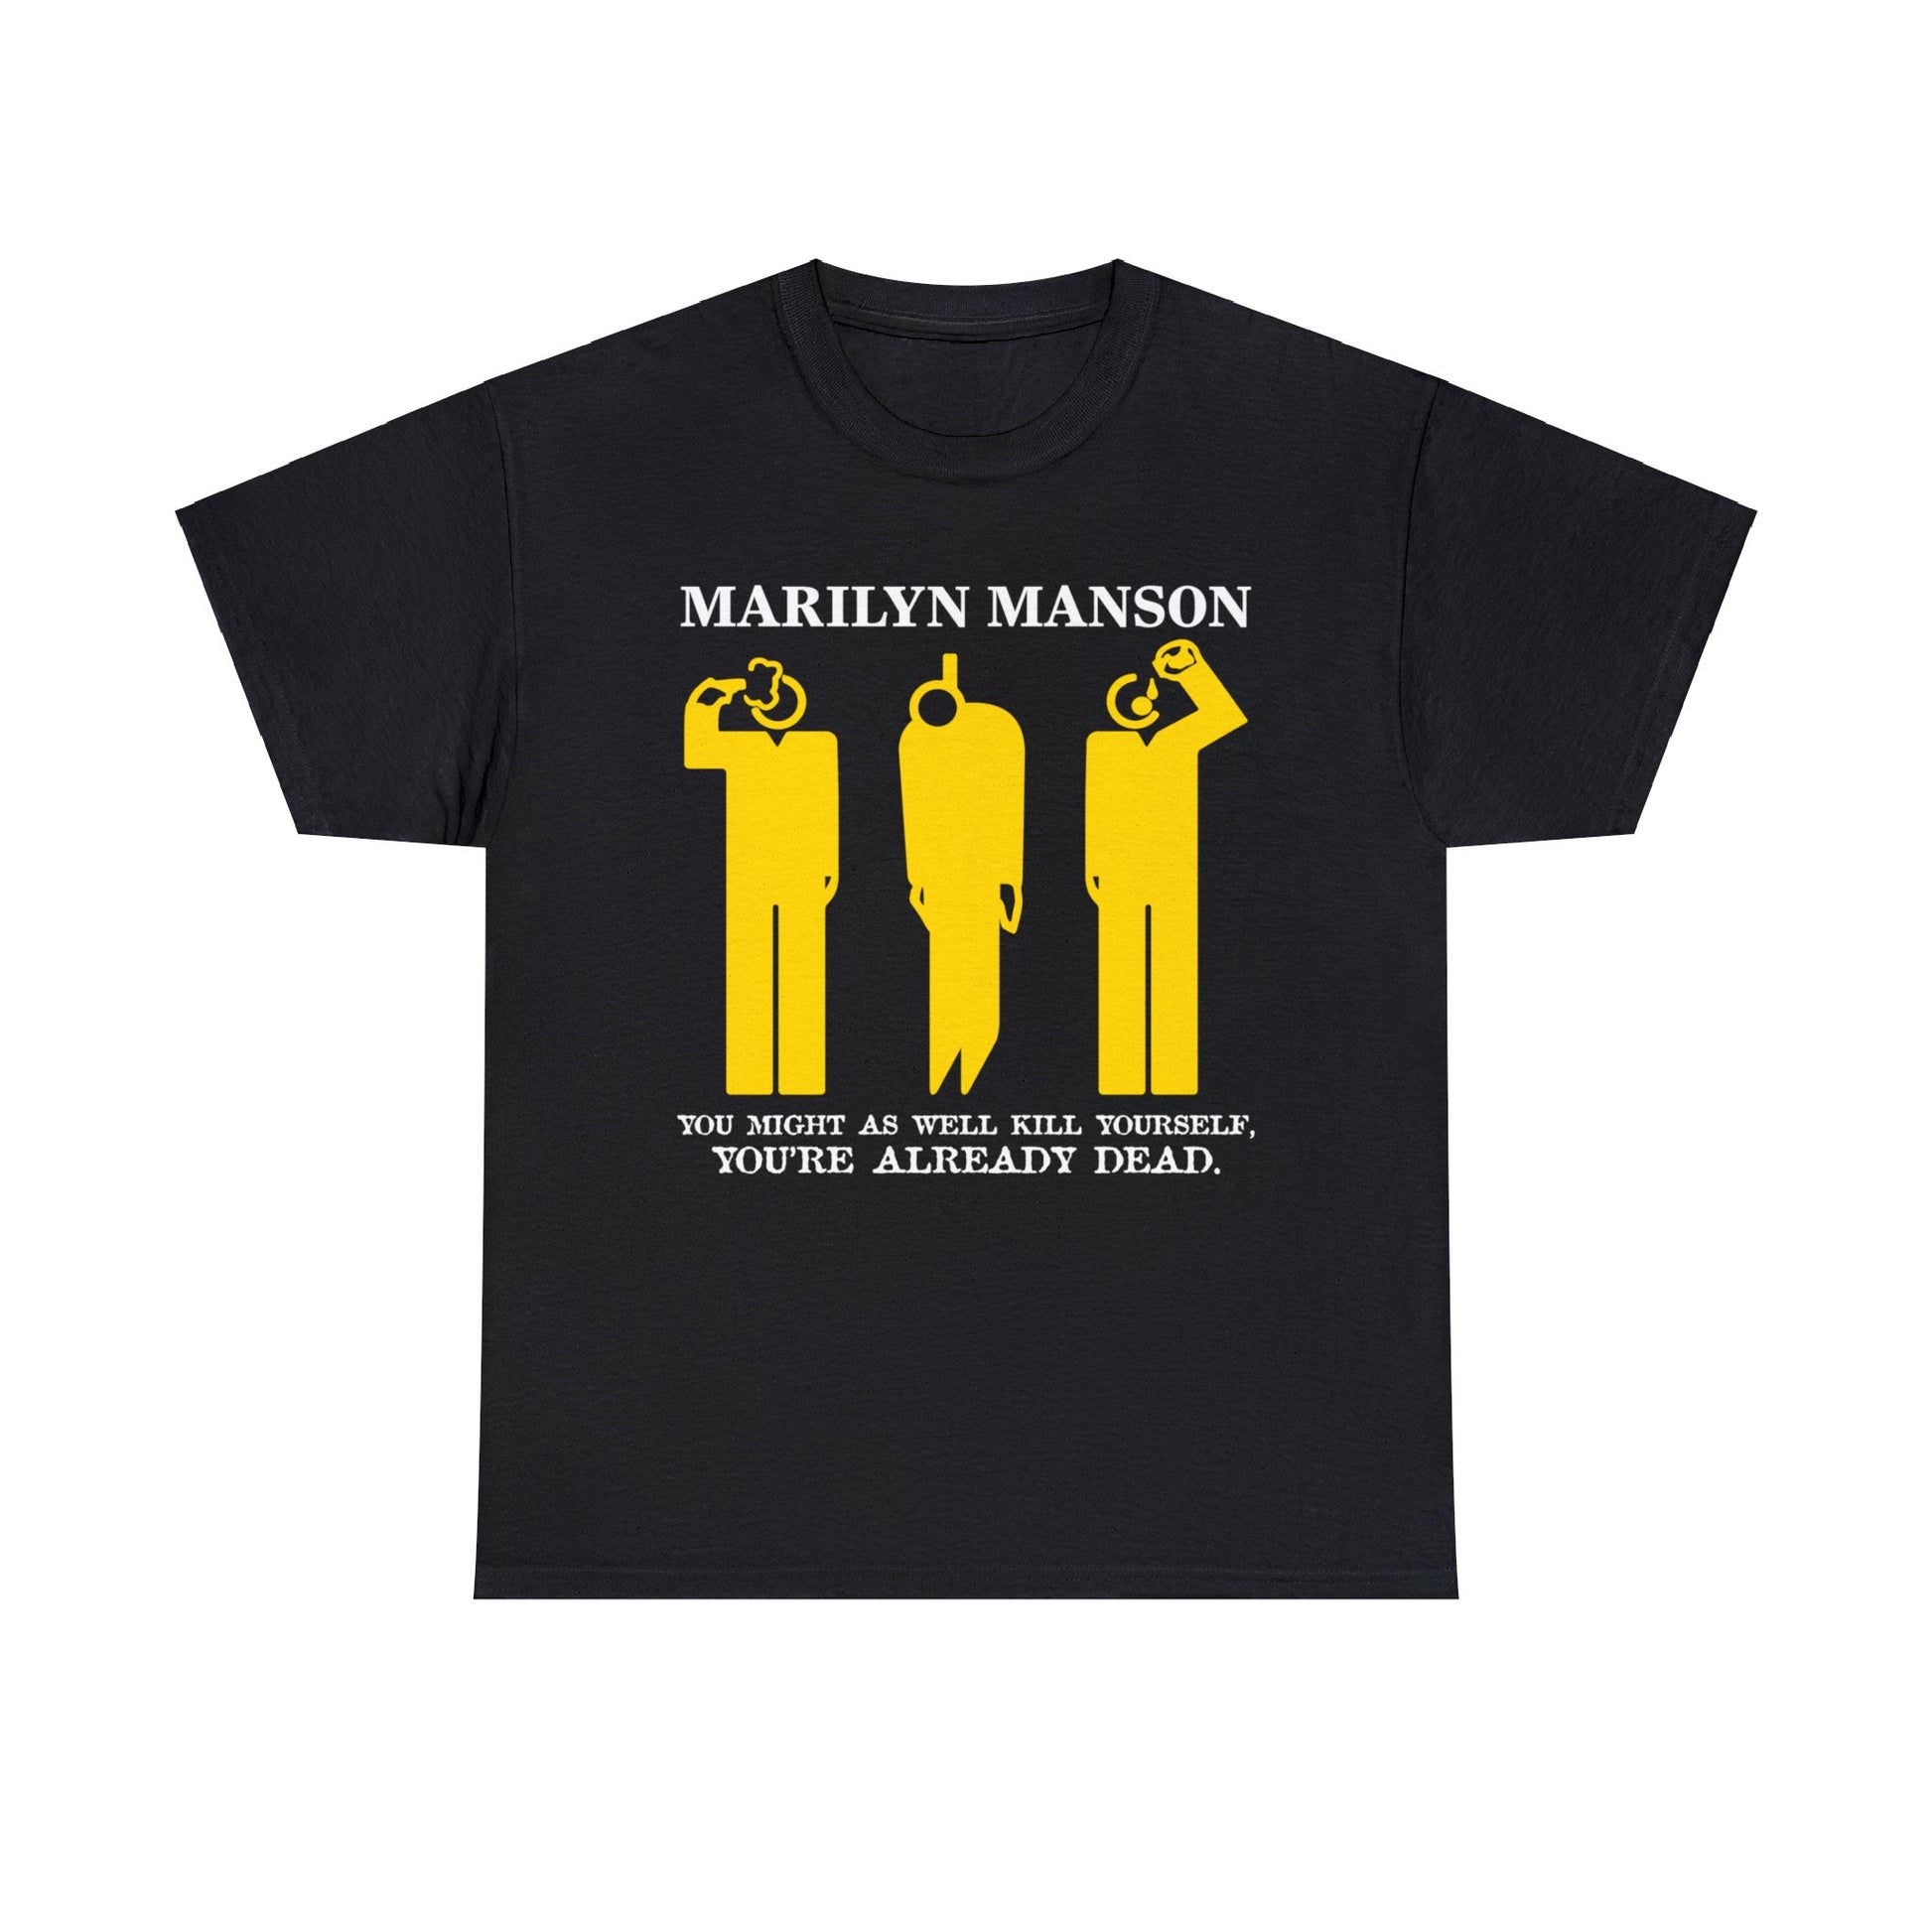 MARILYN MANSON You Might As Well Kill Yourself 1996 T-shirt for Sale